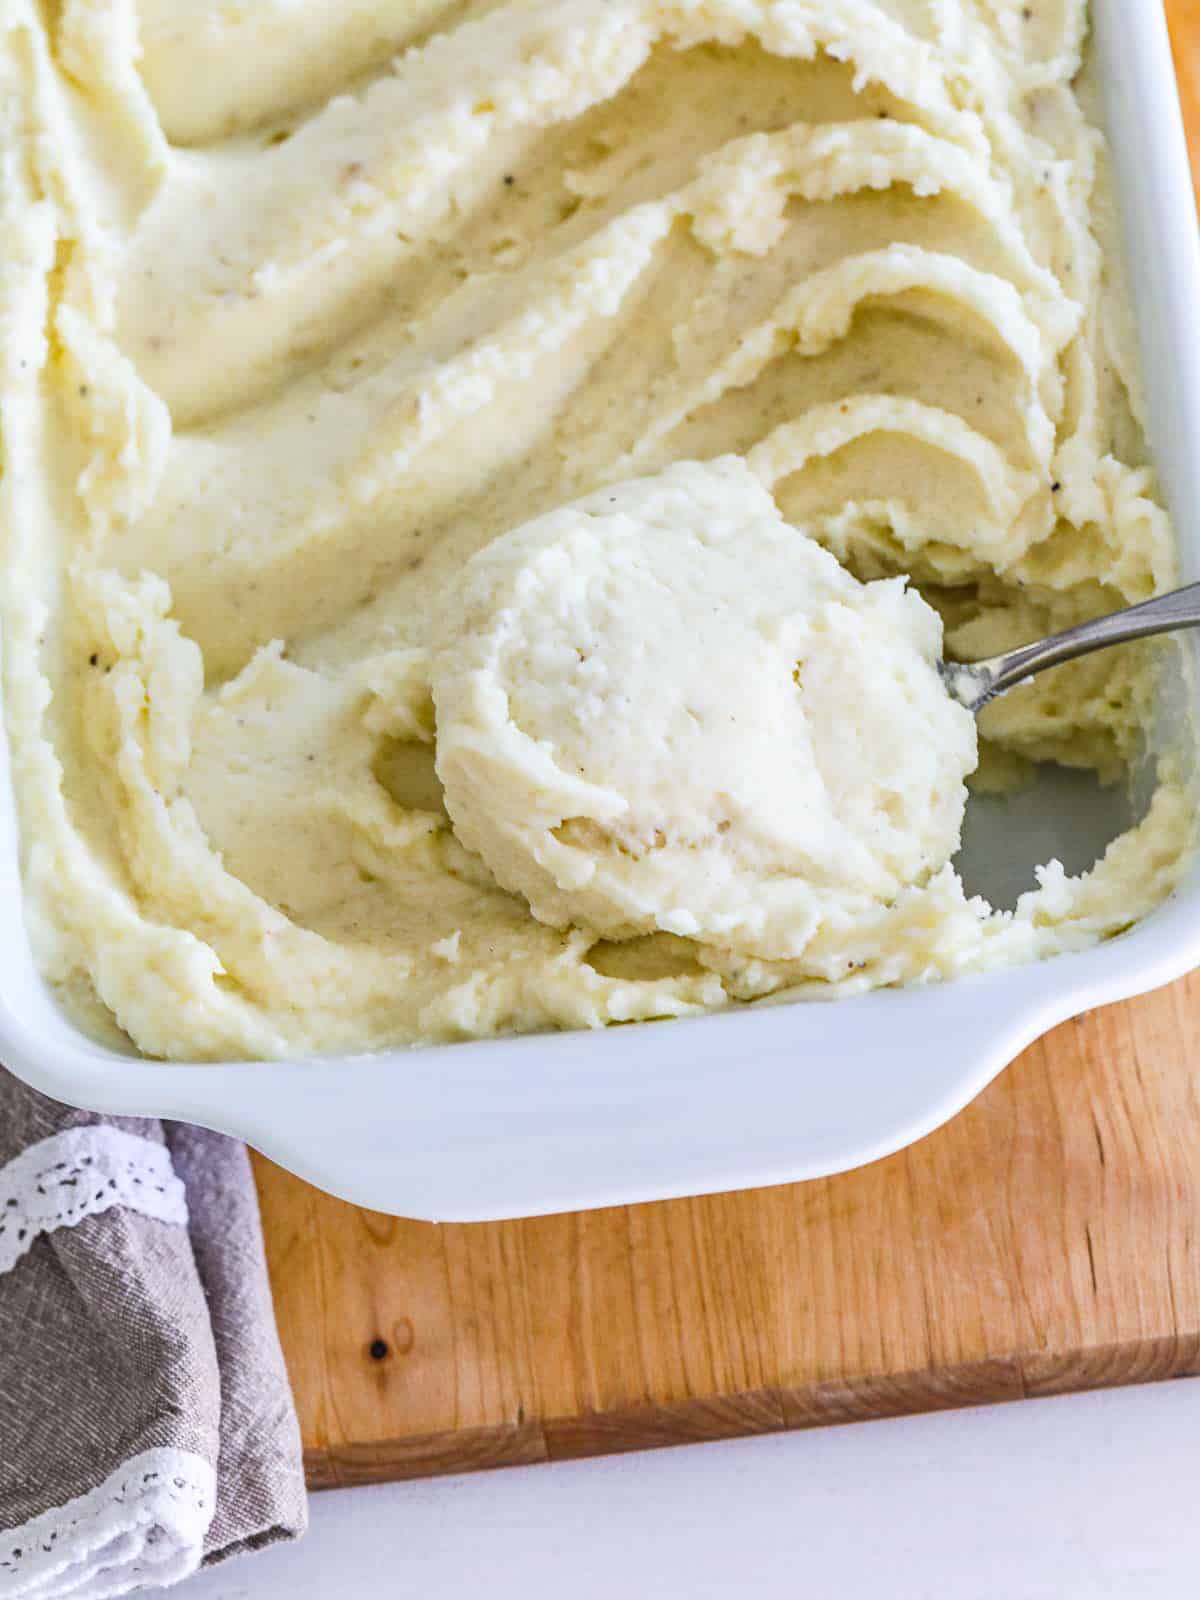 https://www.delicioustable.com/wp-content/uploads/2023/02/Lifting-large-spoon-of-mashed-potatoes.jpg